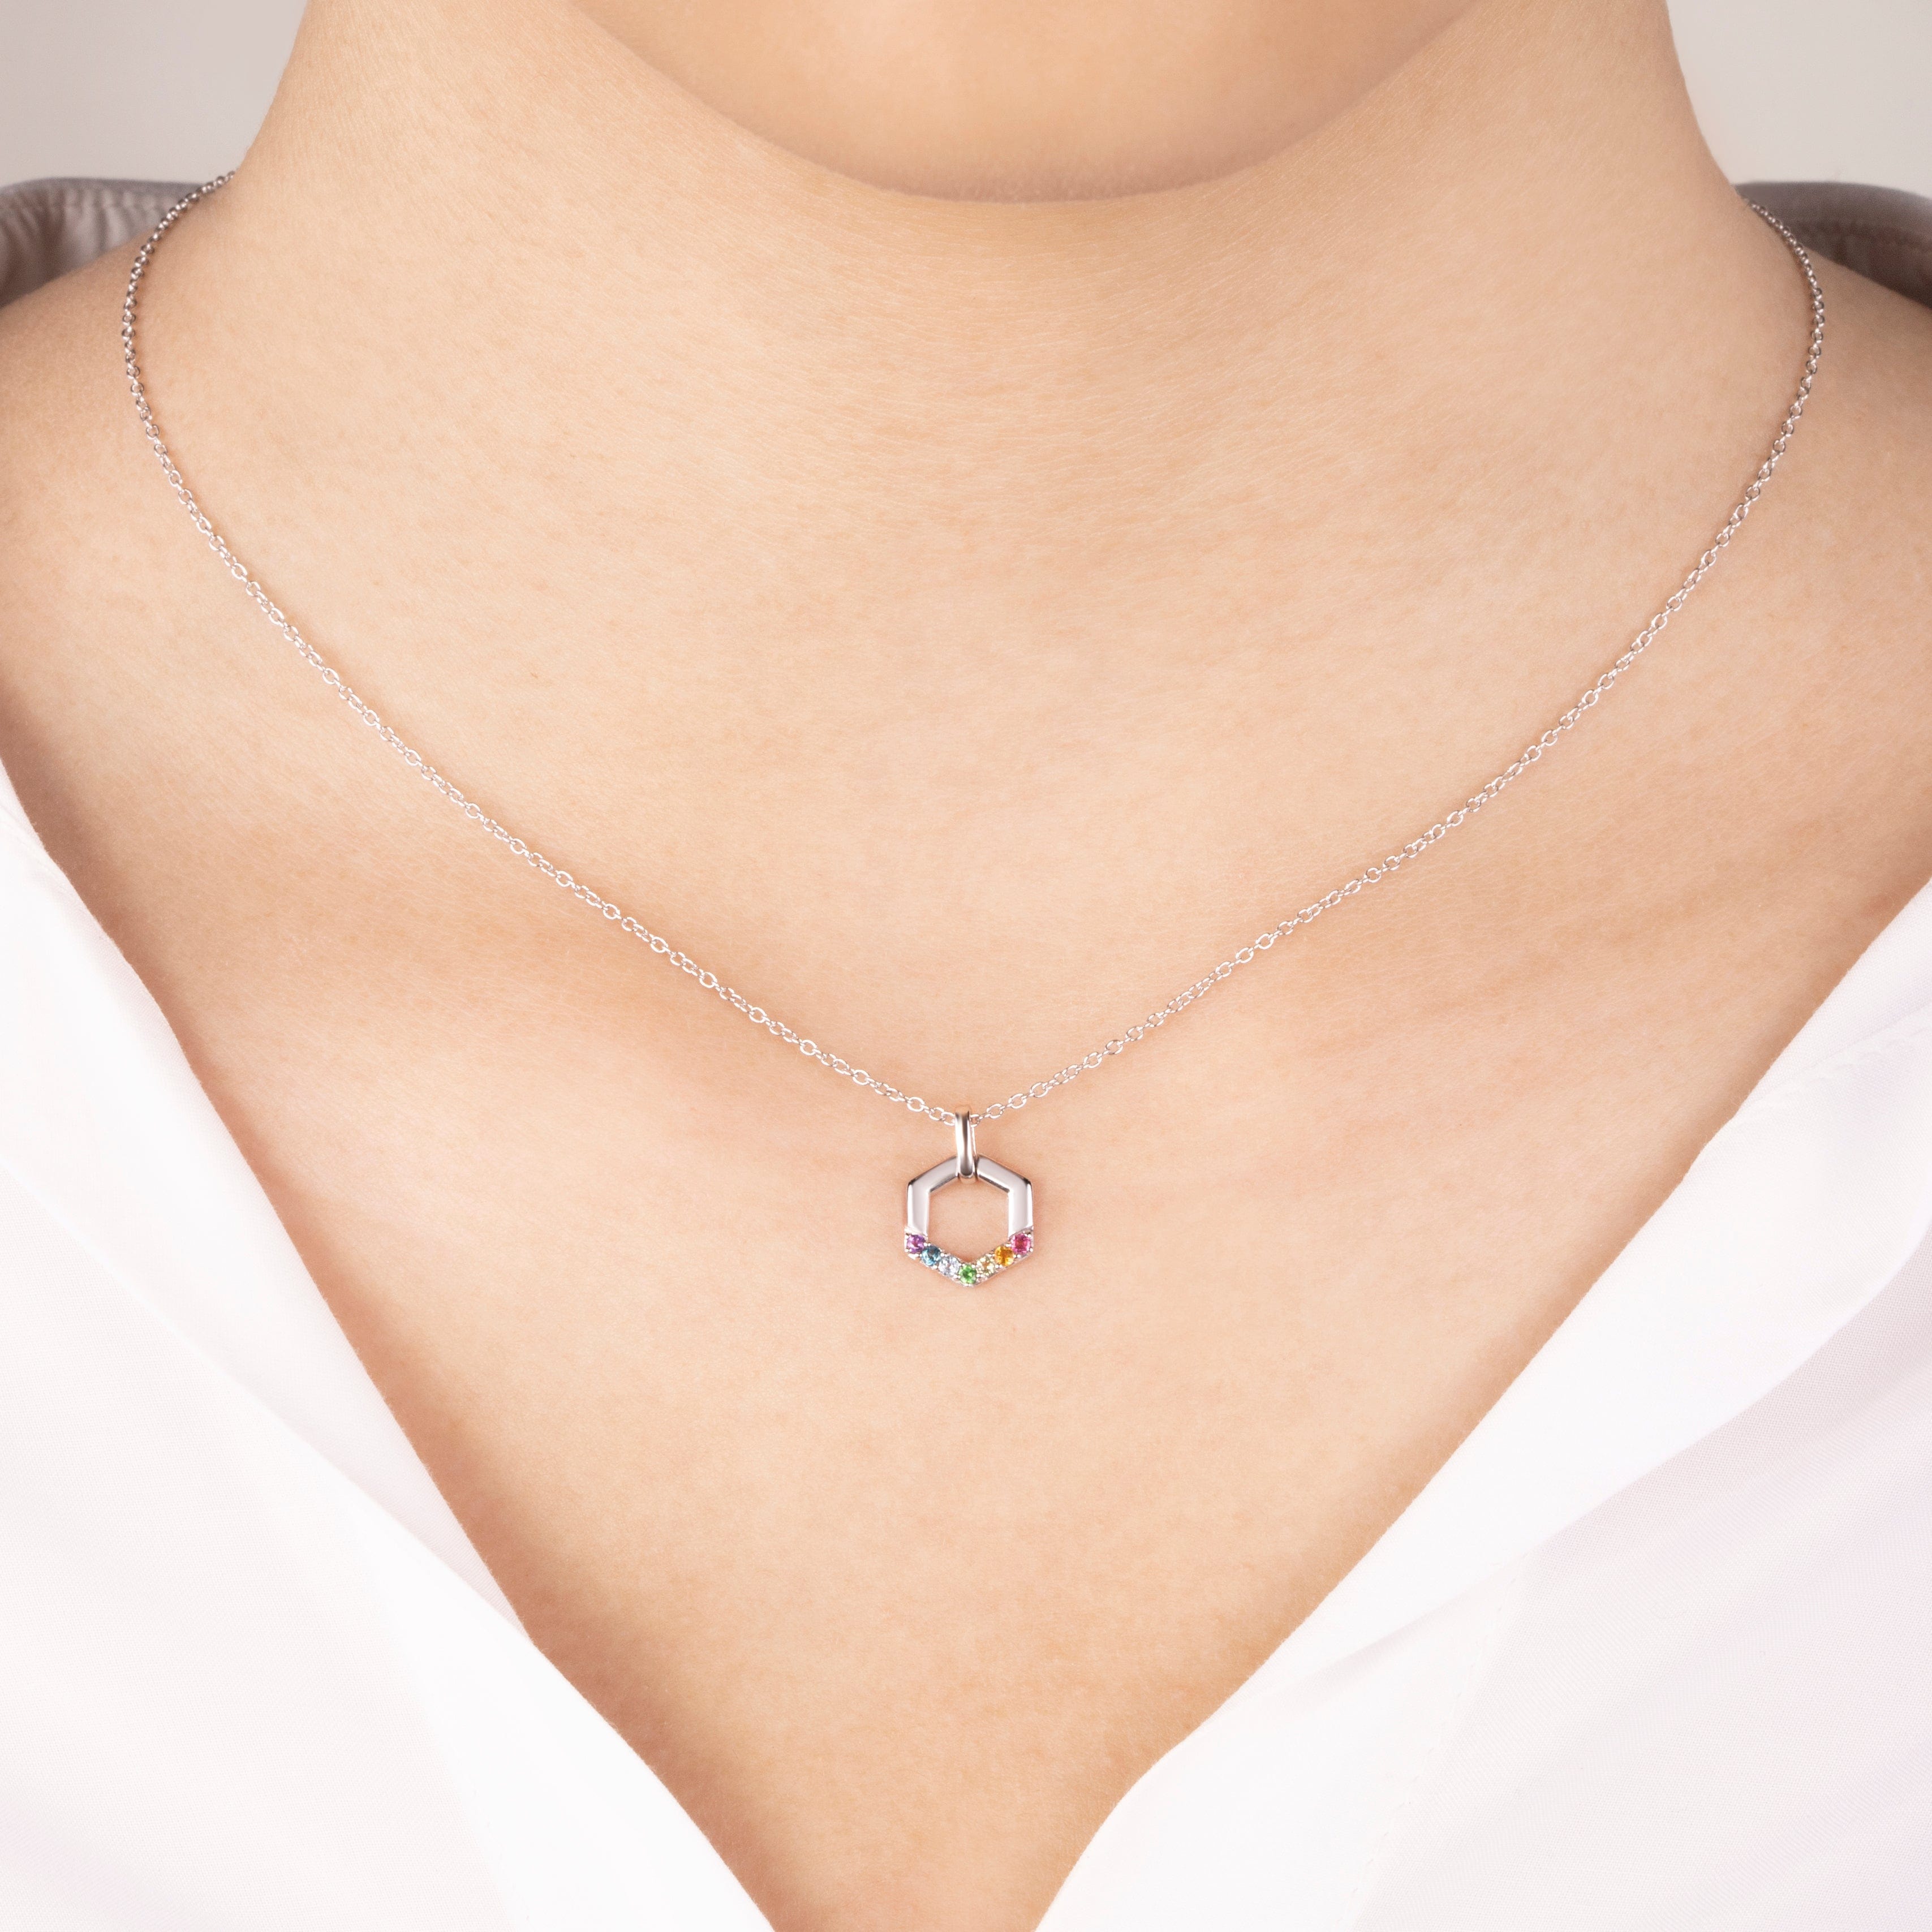 Rainbow Hexagon Necklace in 925 Sterling Silver